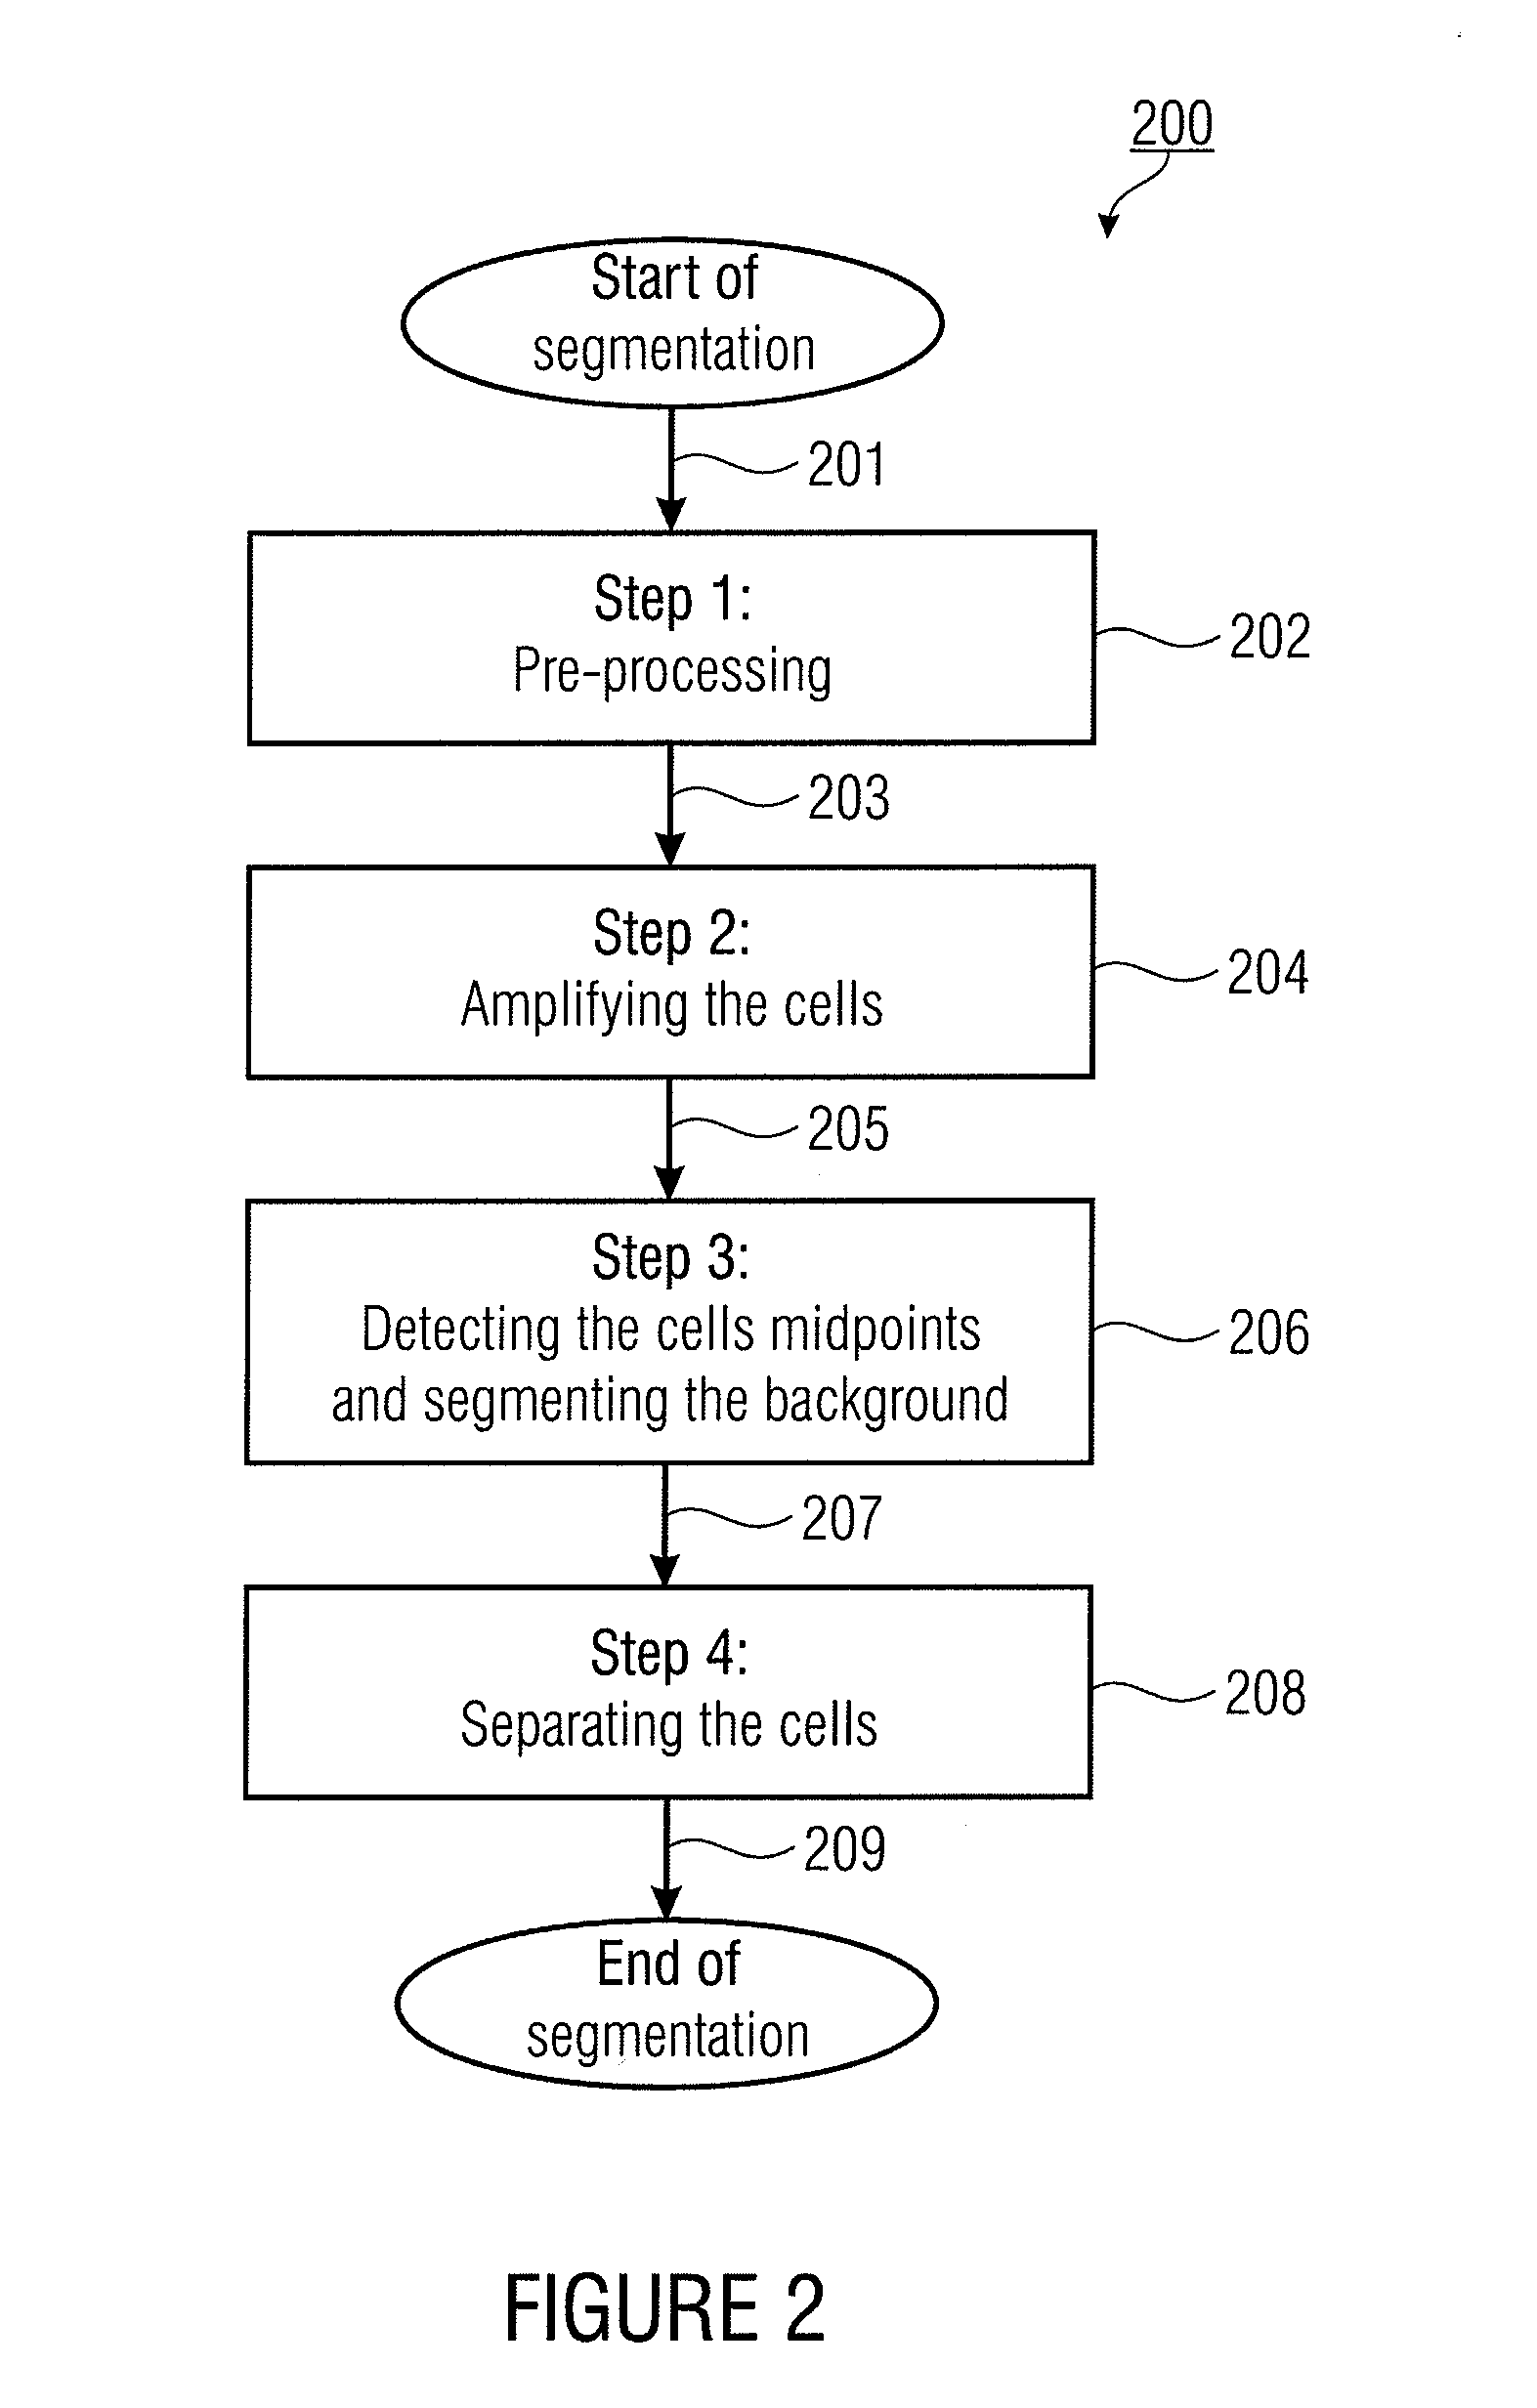 Method and Apparatus for Segmenting Biological Cells in a Picture